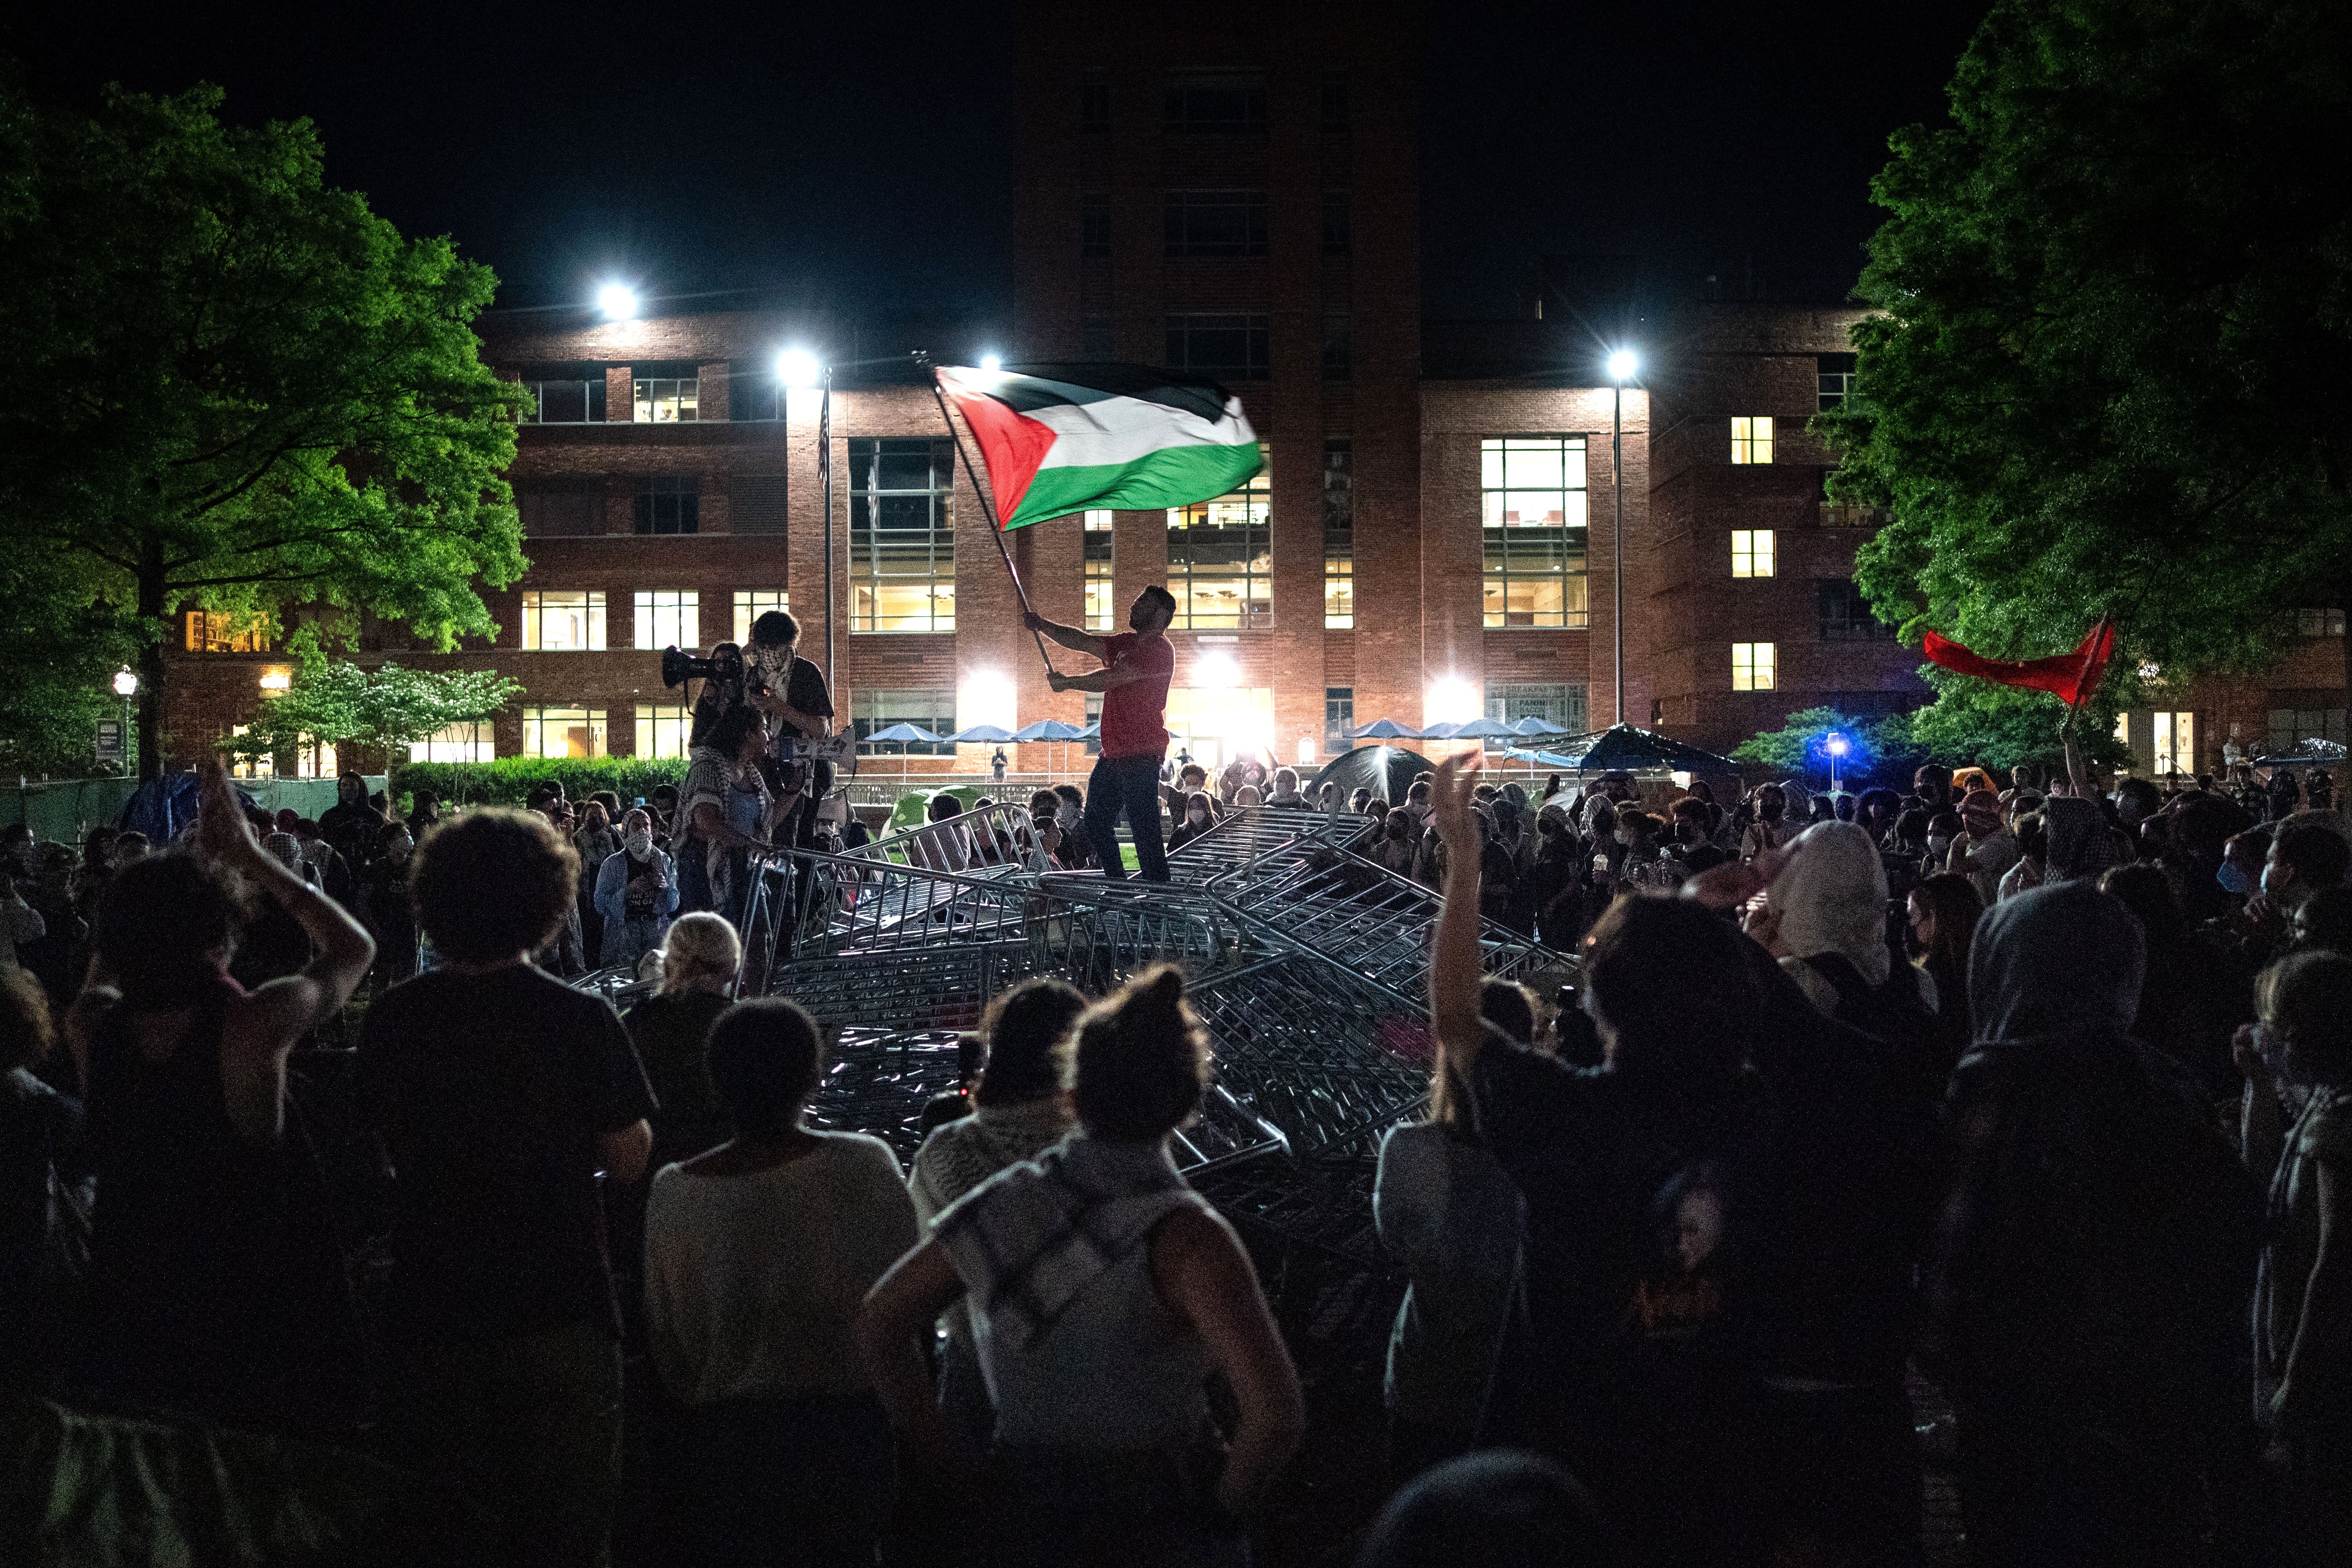 Protesters at night at the University Yard standing on top of barricades.